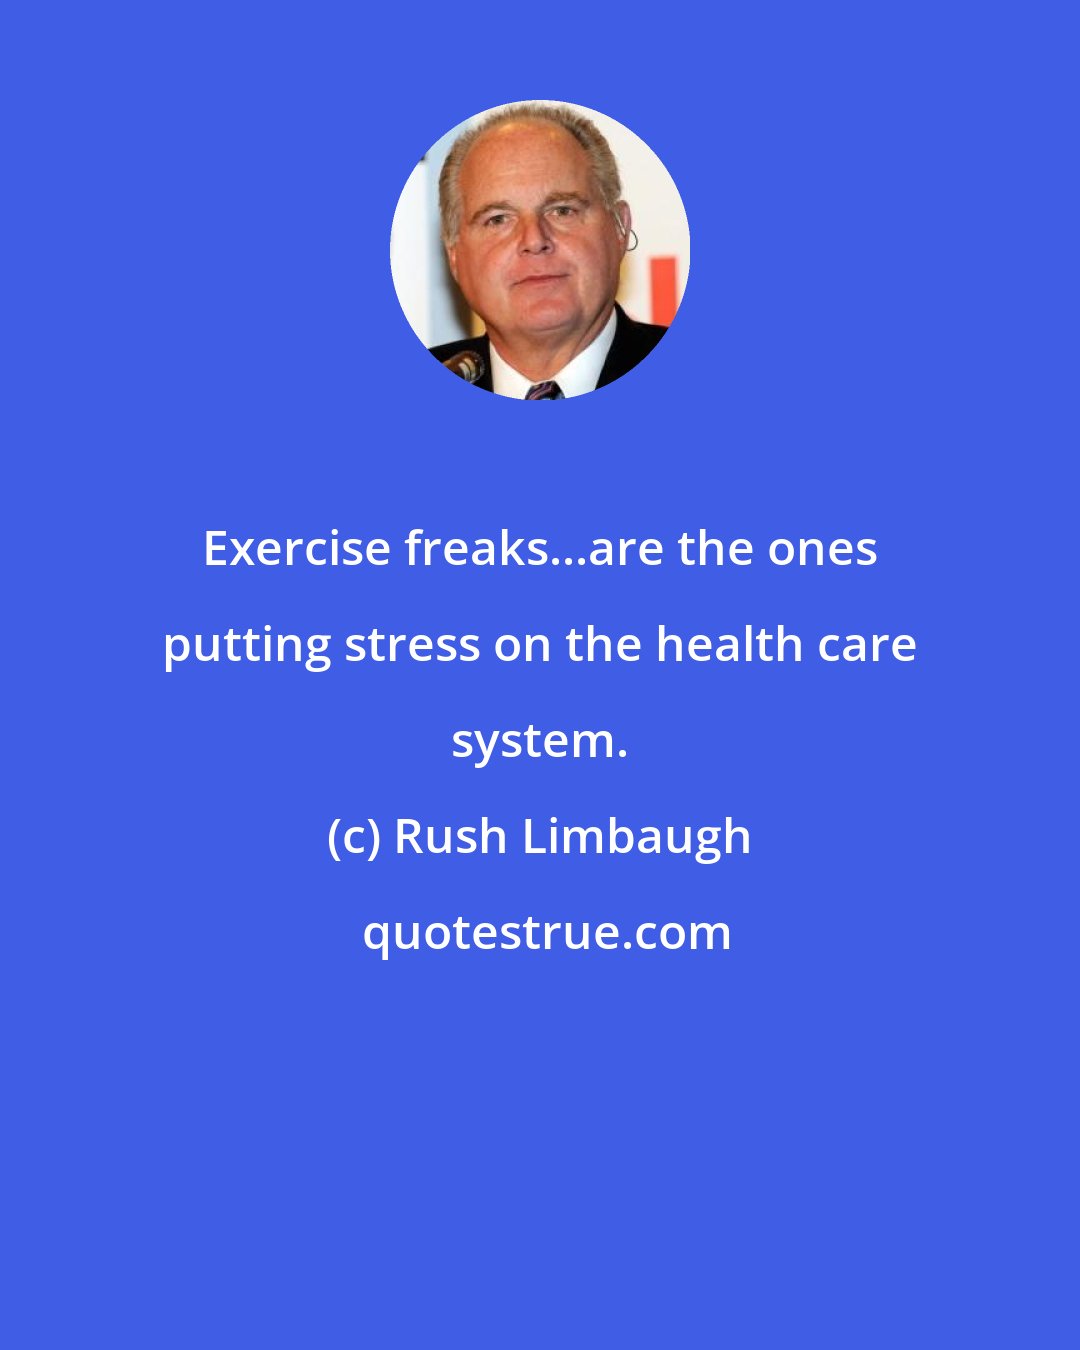 Rush Limbaugh: Exercise freaks...are the ones putting stress on the health care system.